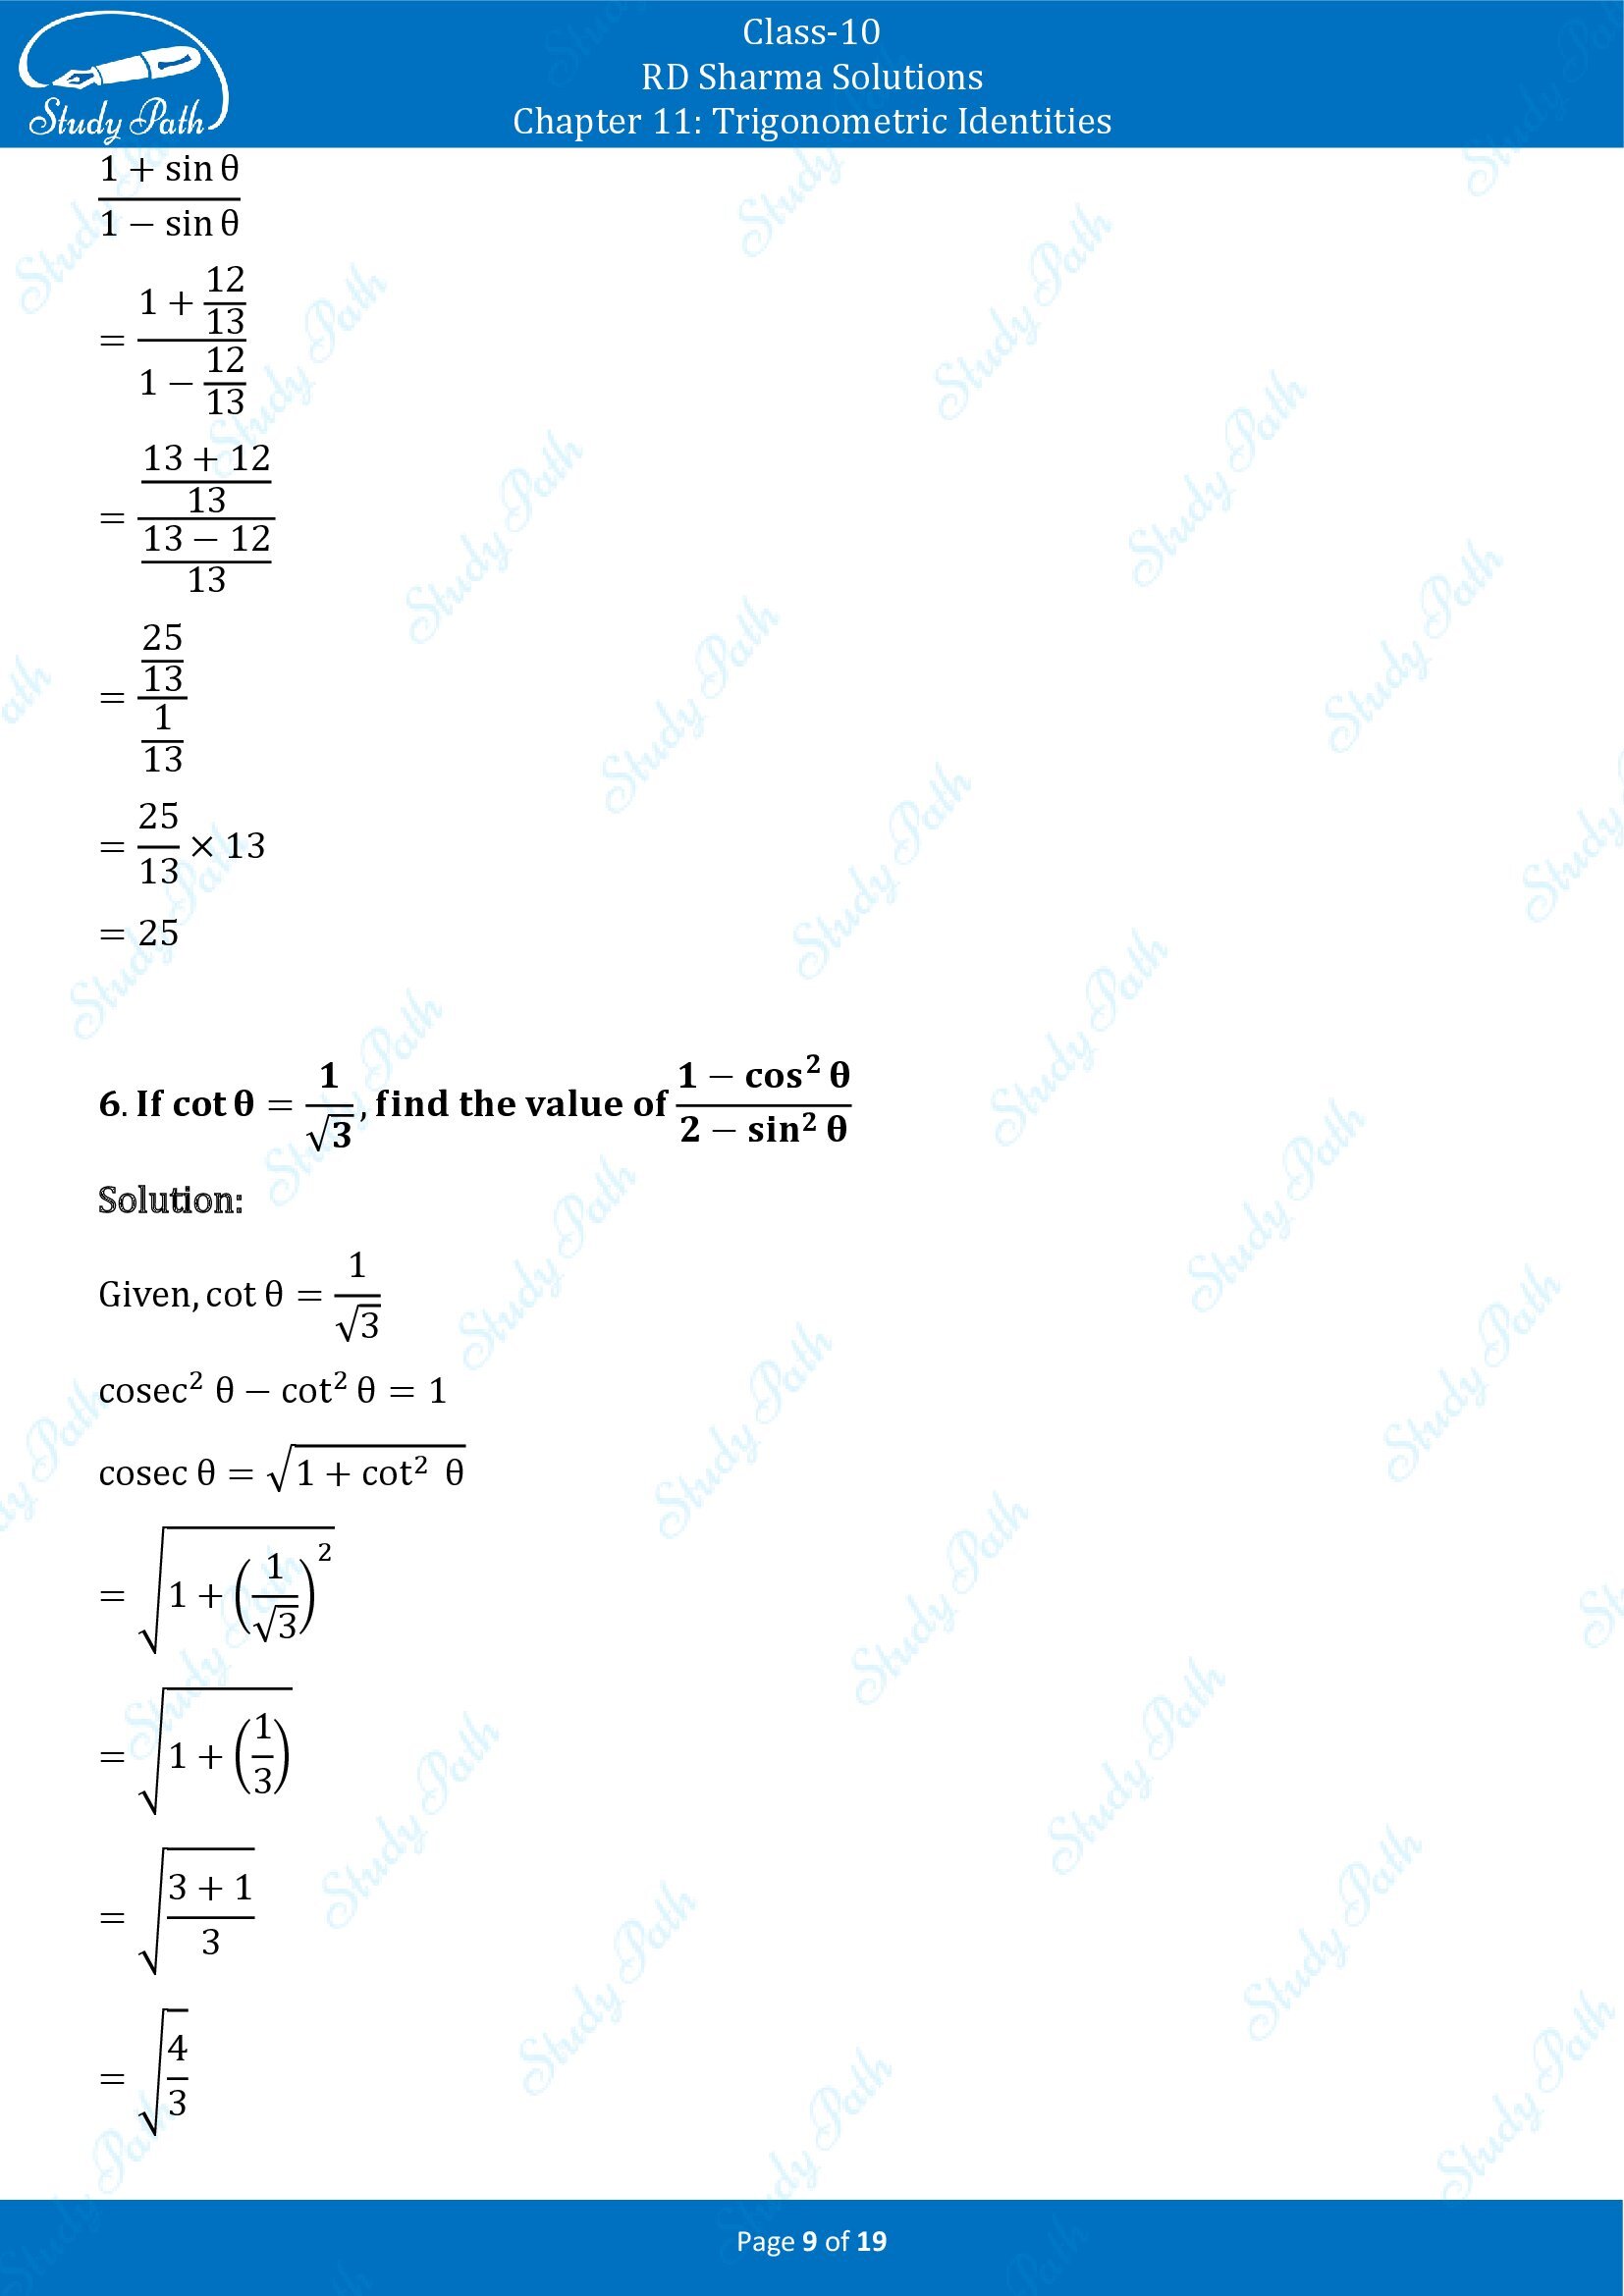 RD Sharma Solutions Class 10 Chapter 11 Trigonometric Identities Exercise 11.2 00009